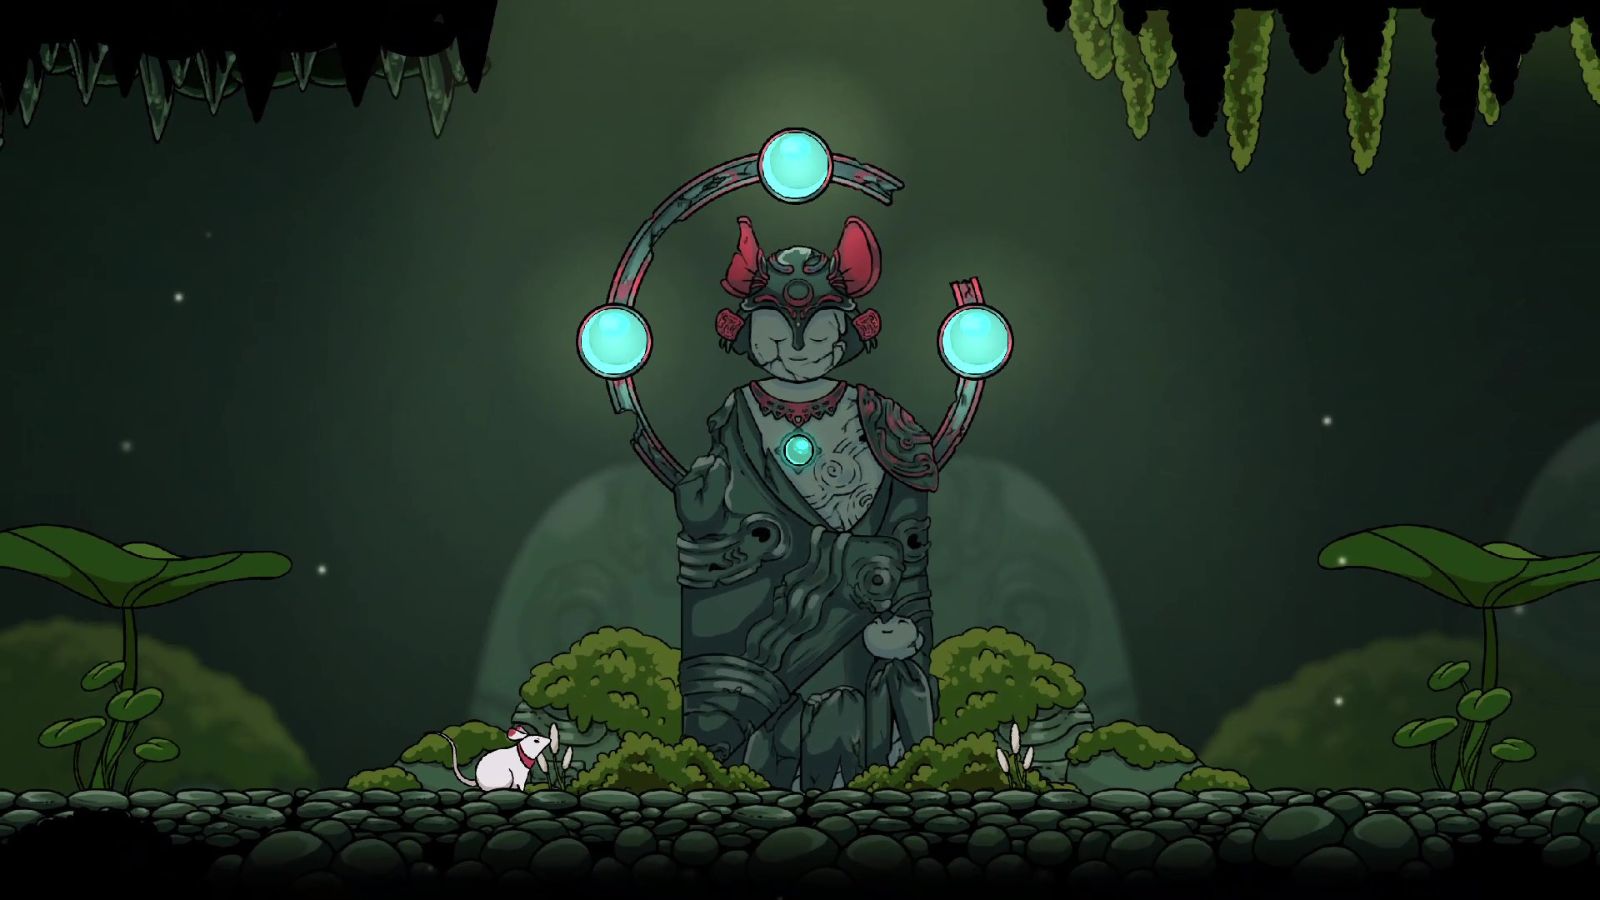 A mouse sits below a broken shrine with 3 blue orbs